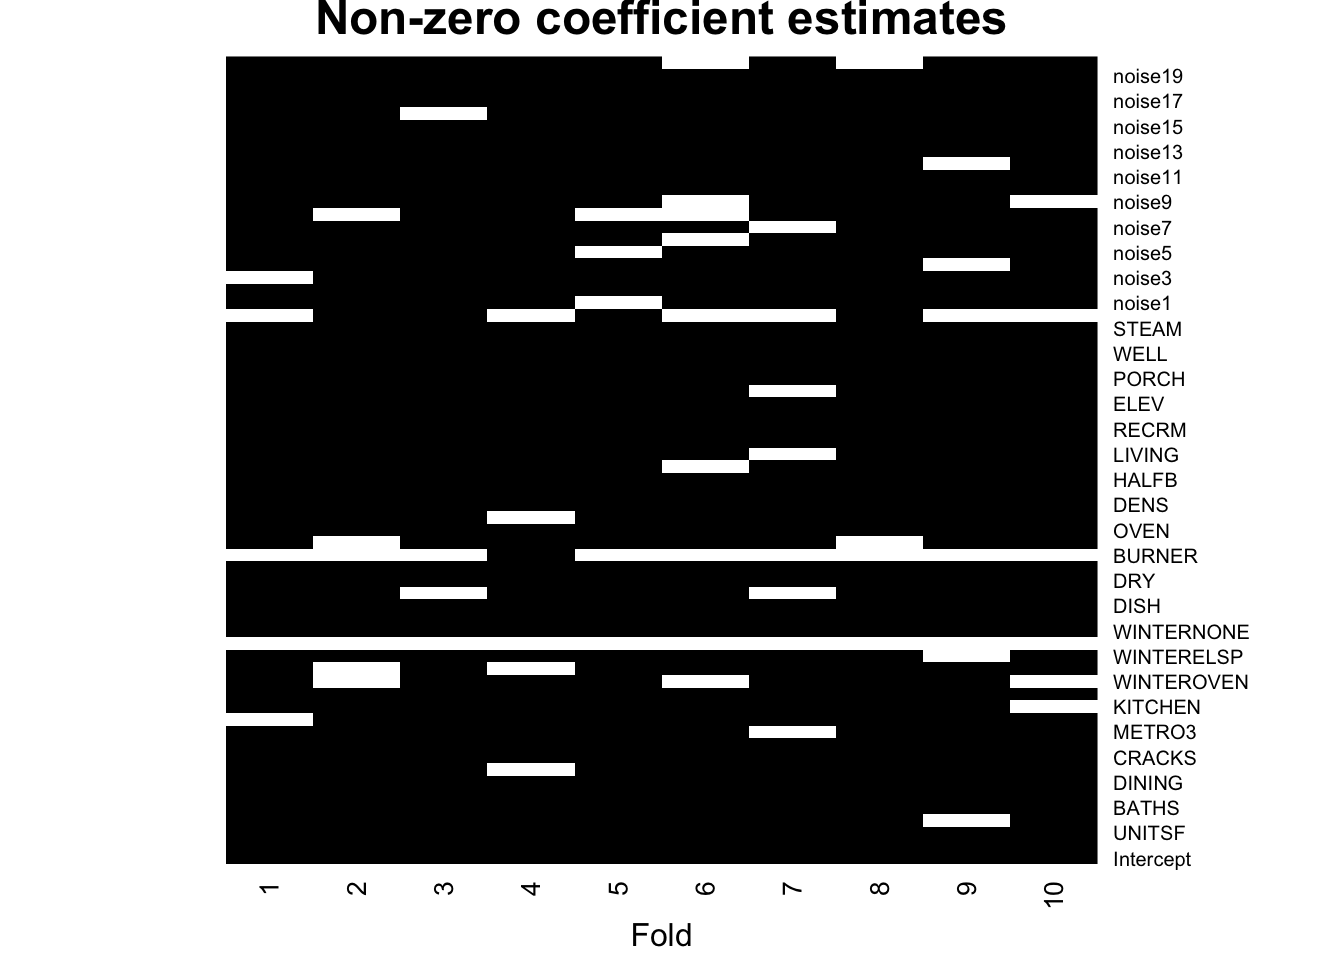 Lasso coefficients estimated removing each fold